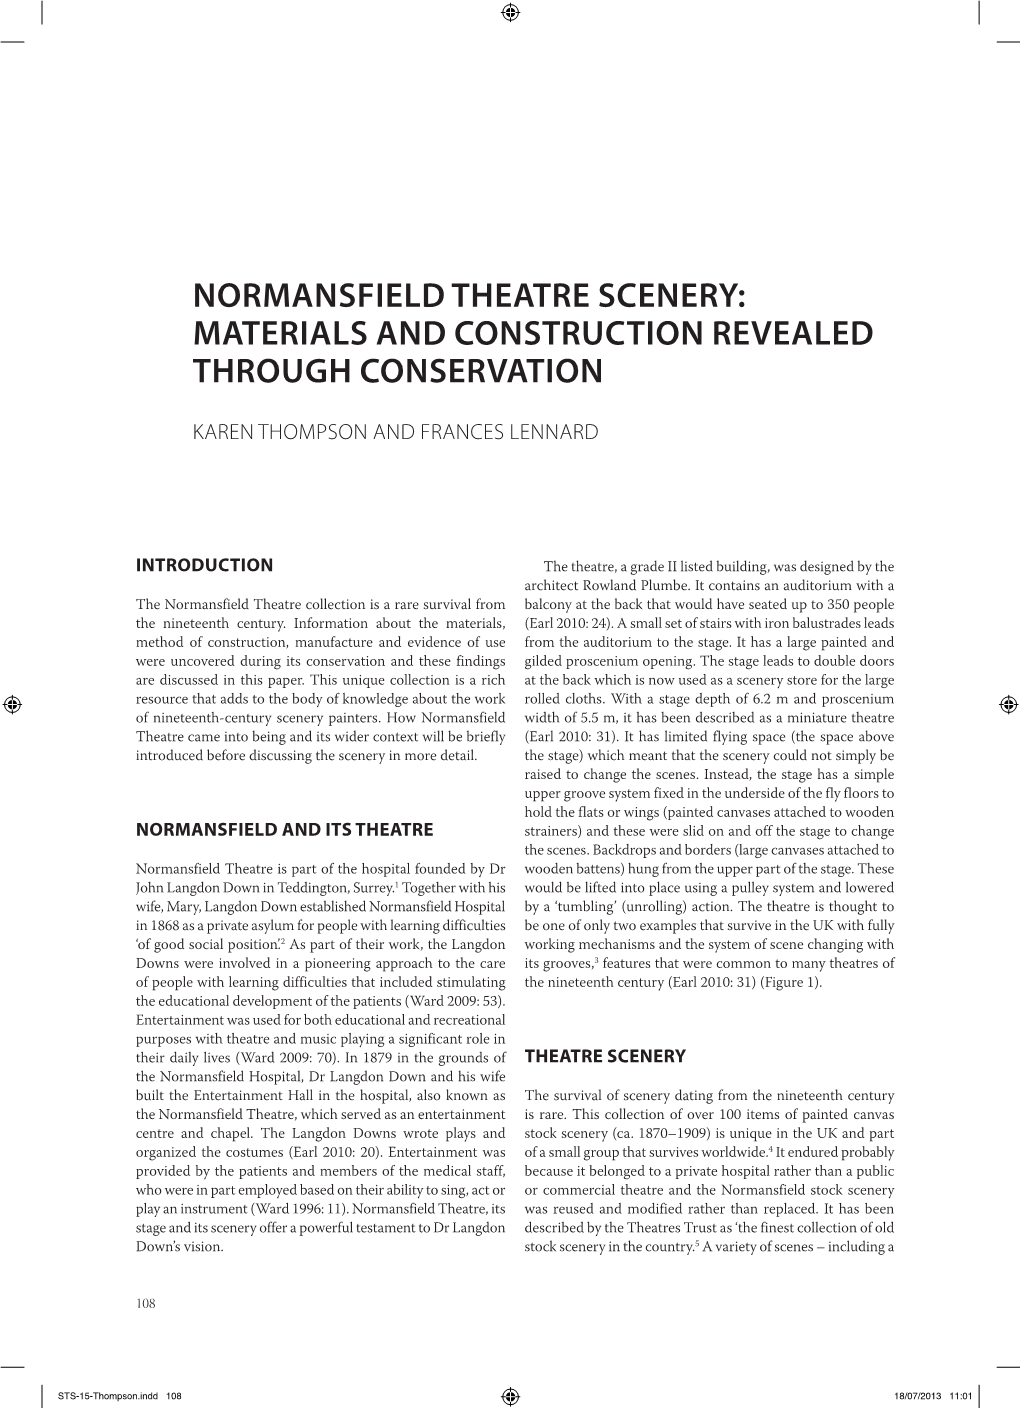 Normansfield Theatre Scenery: Materials and Construction Revealed Through Conservation